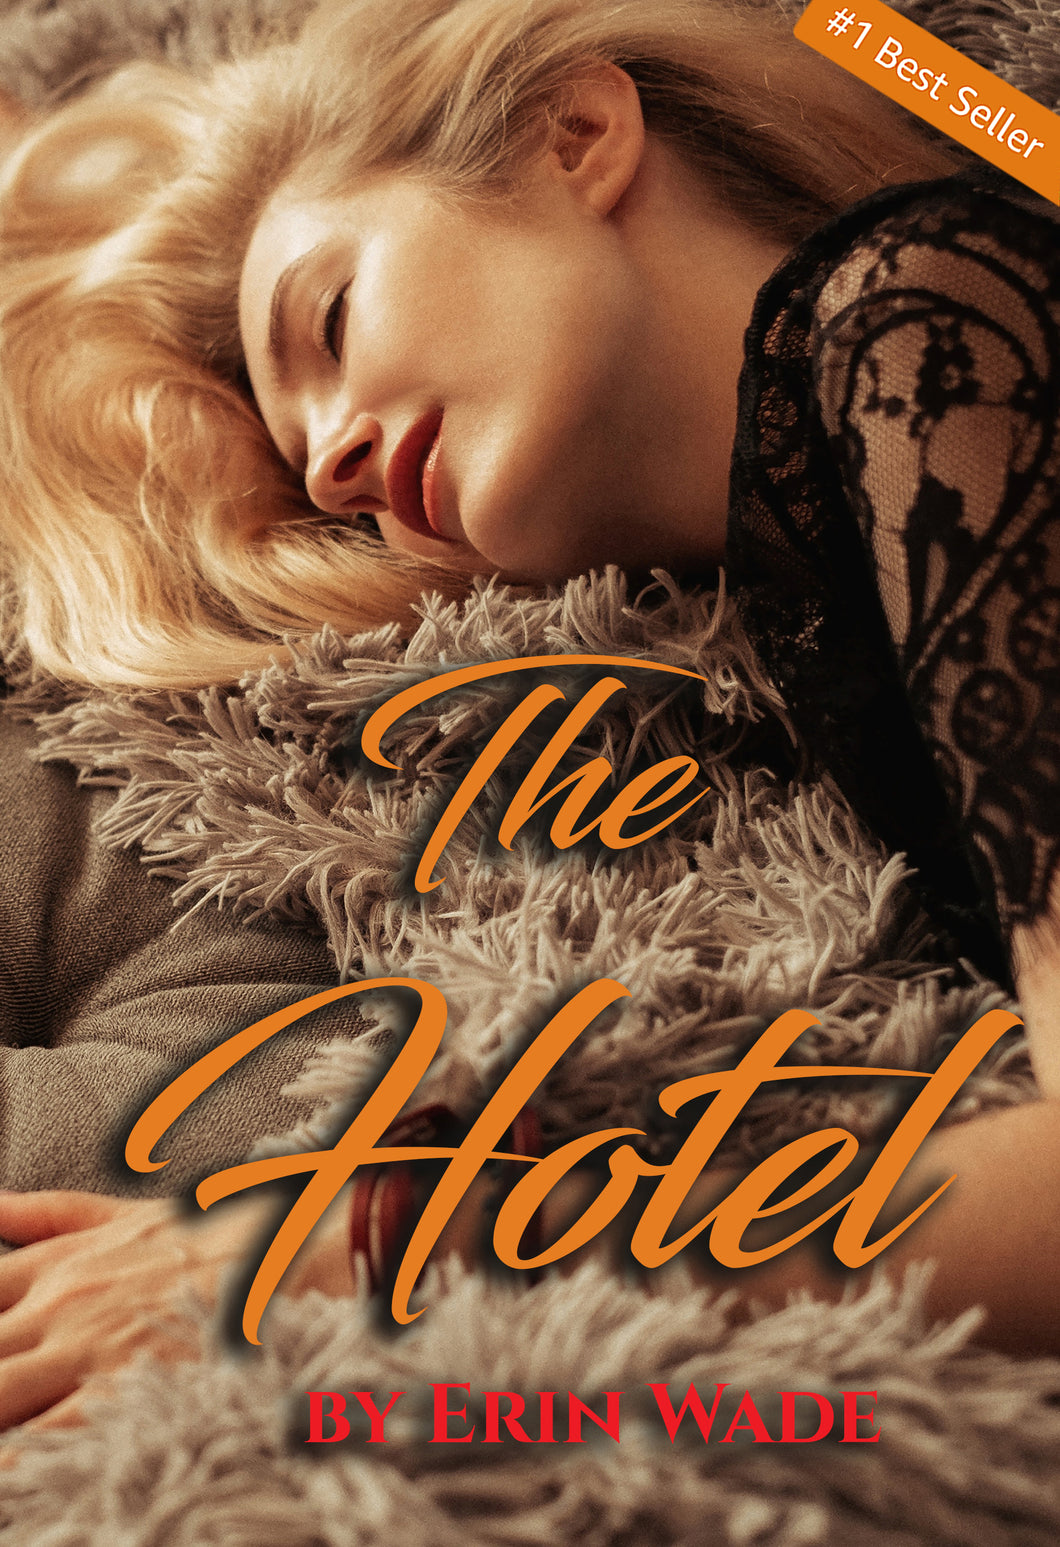 THE HOTEL - HARDCOVER autographed by Erin Wade